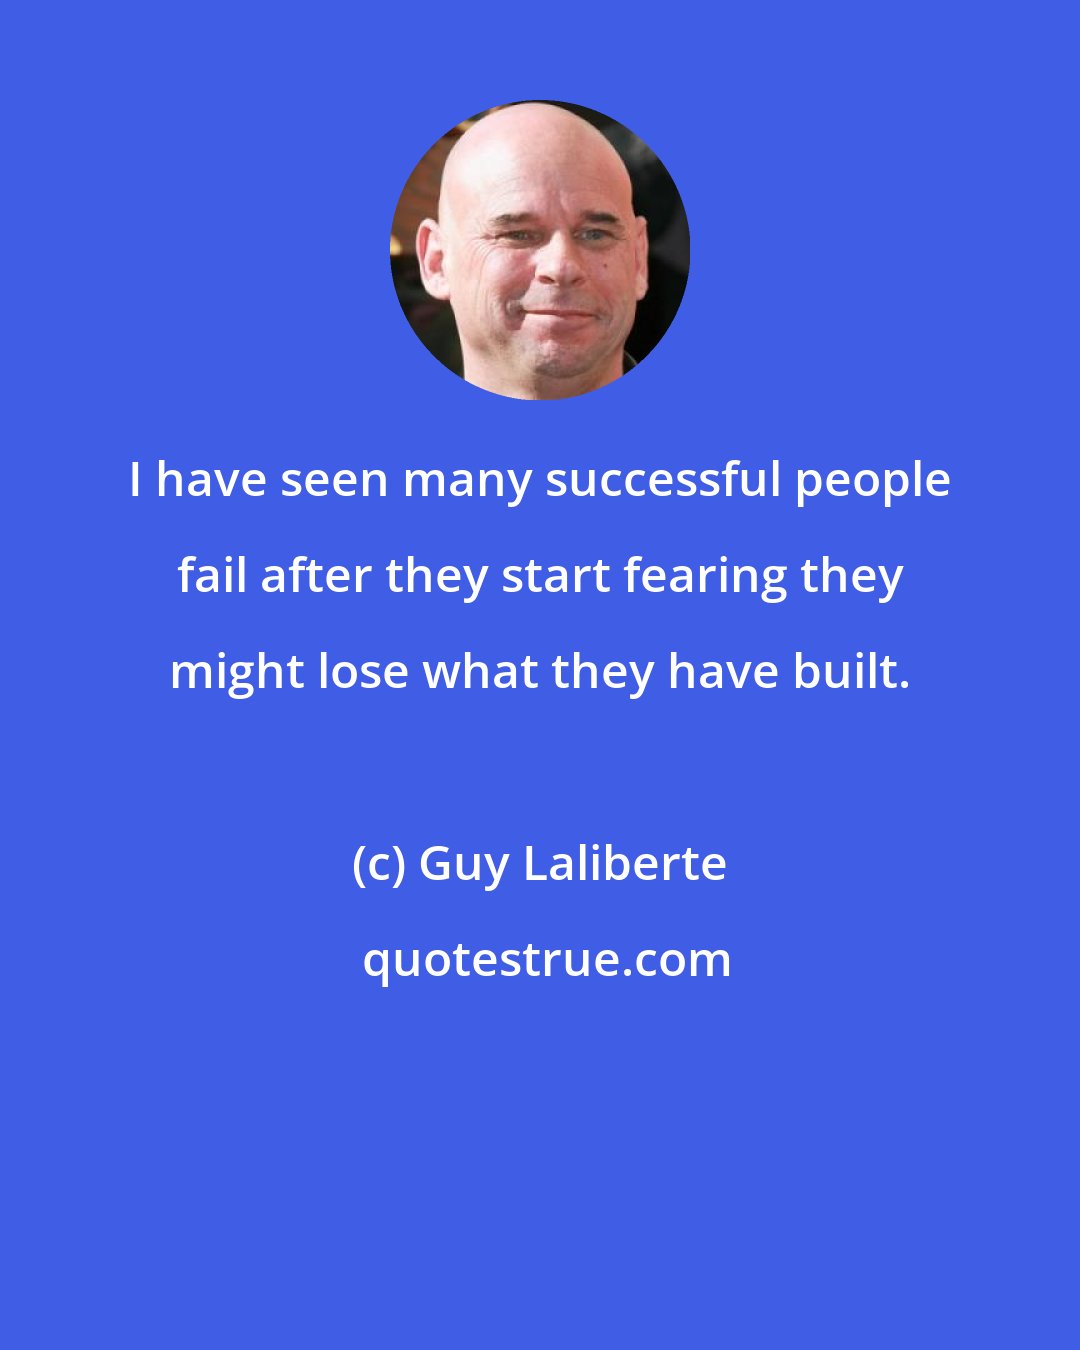 Guy Laliberte: I have seen many successful people fail after they start fearing they might lose what they have built.